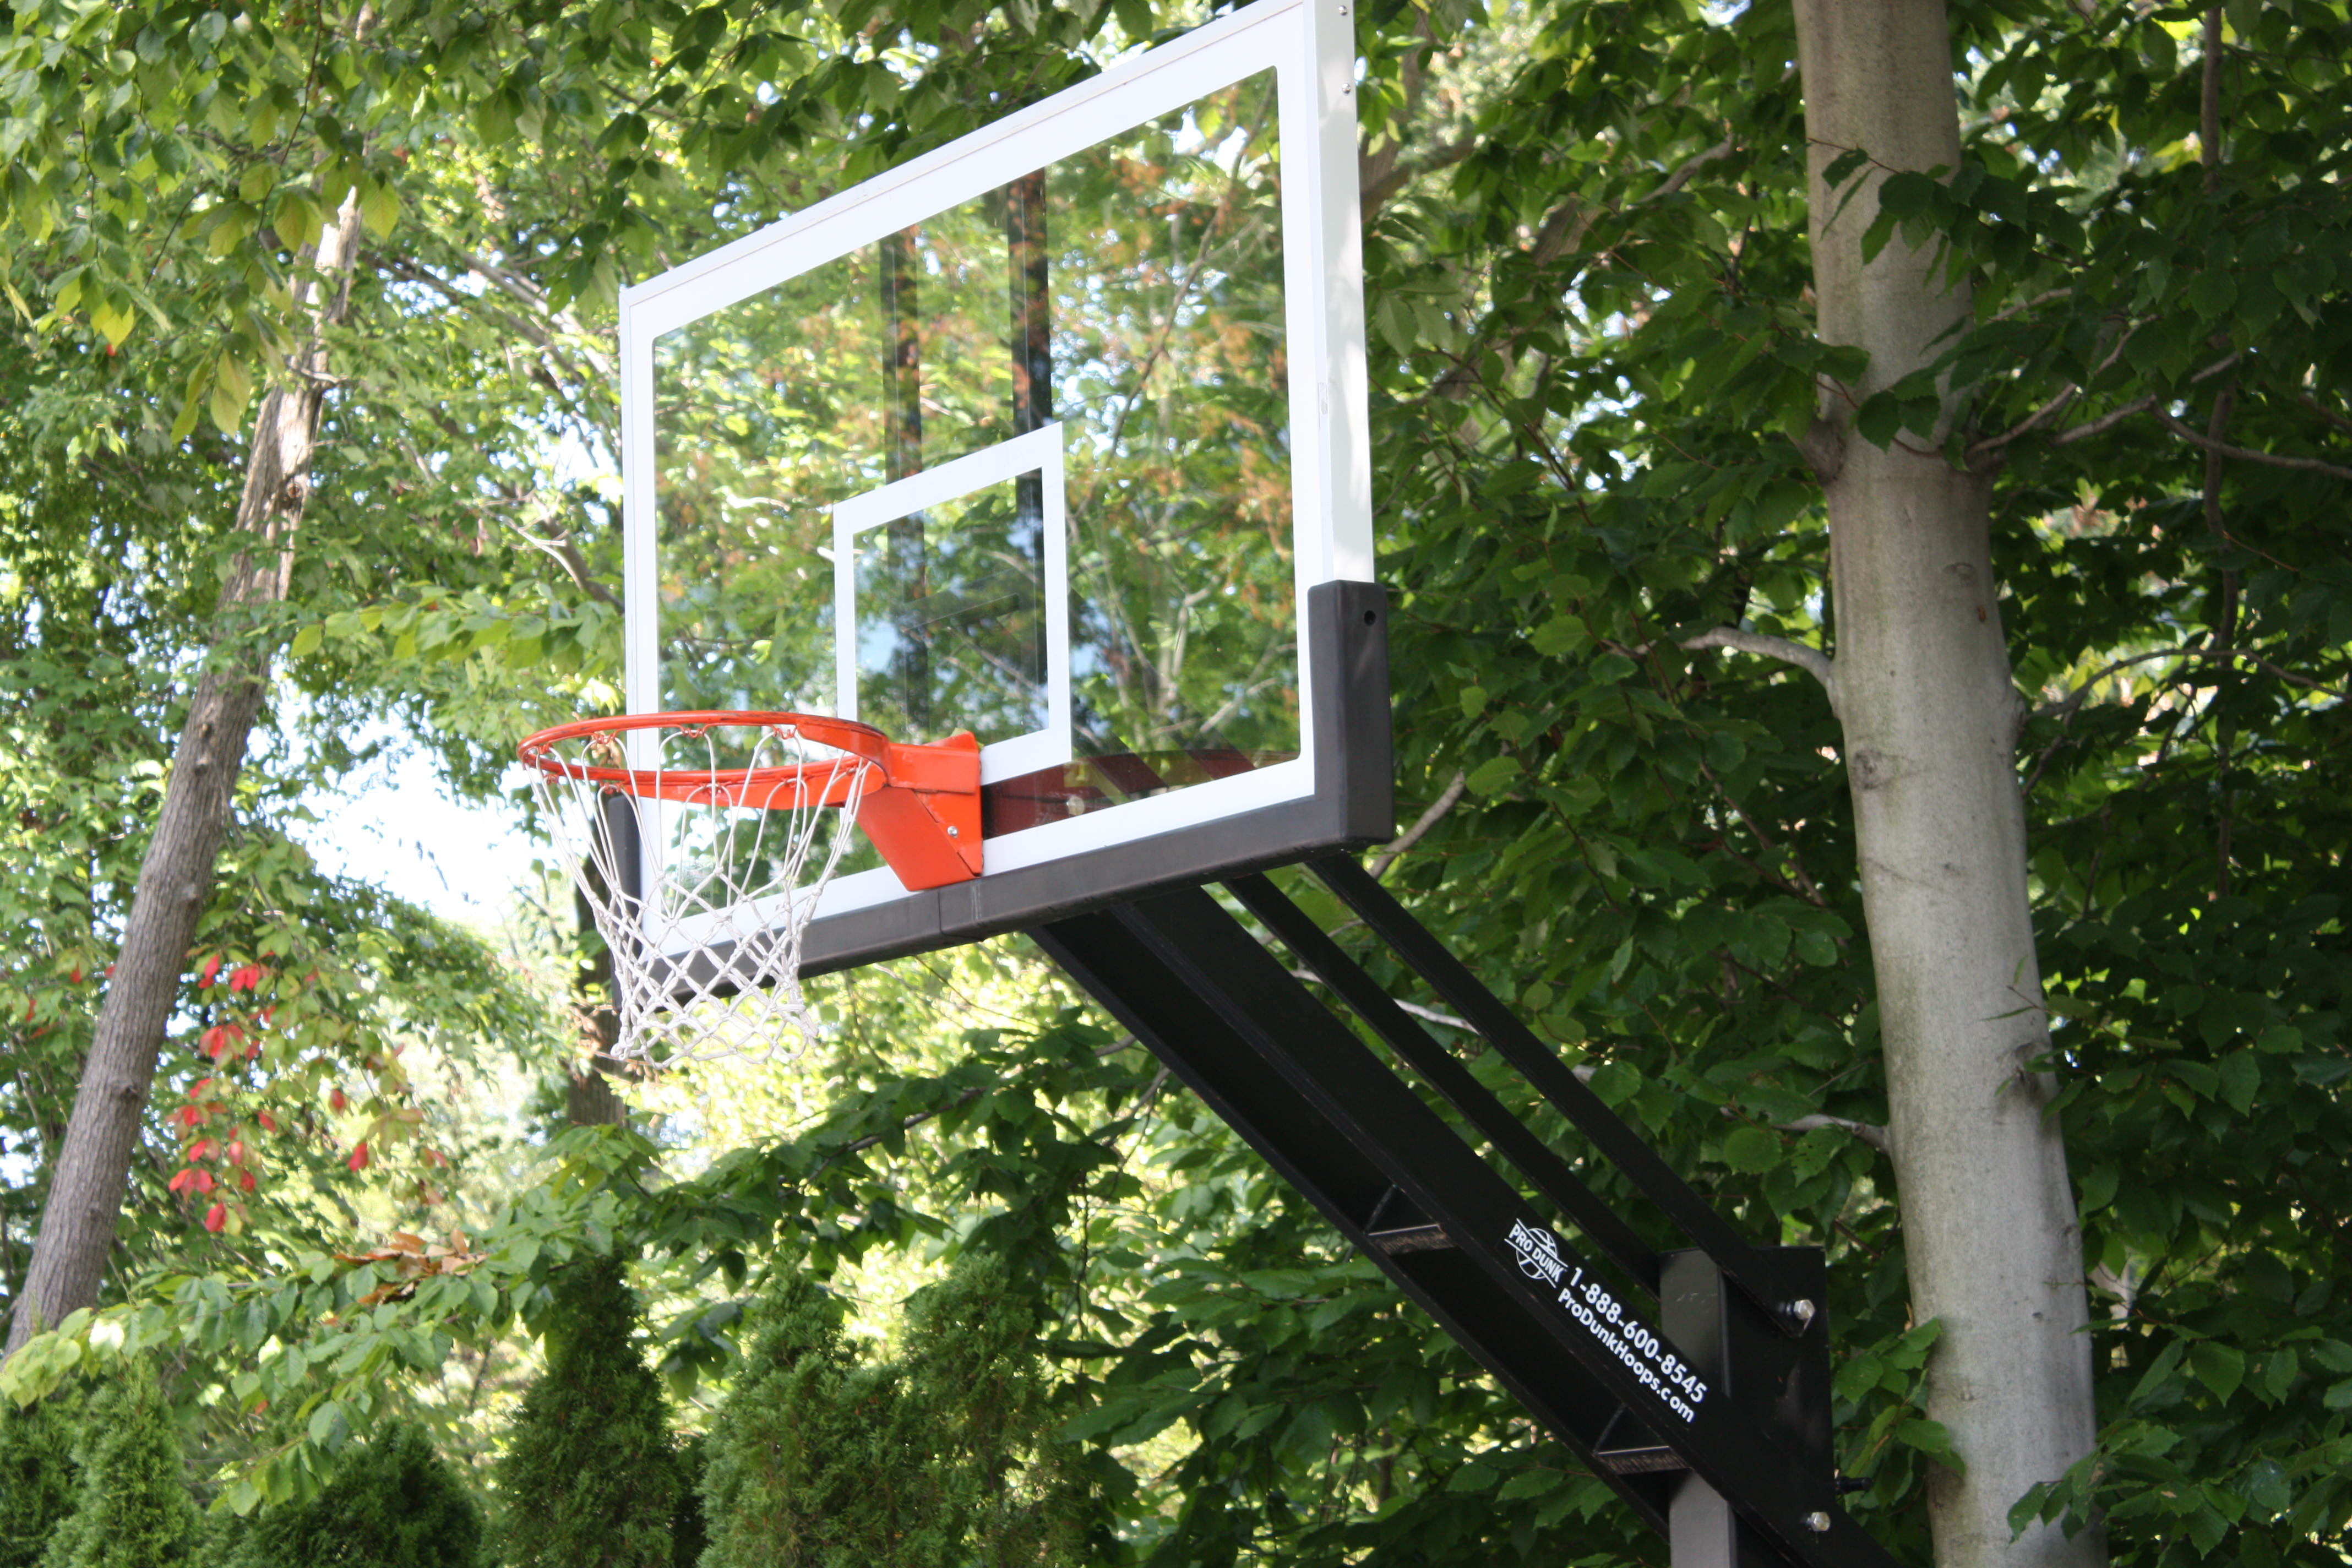 A great shot of the Pro Dunk Platinum regulation-size tempered glass backboard with beautiful foliage seen around and through the clear glass.